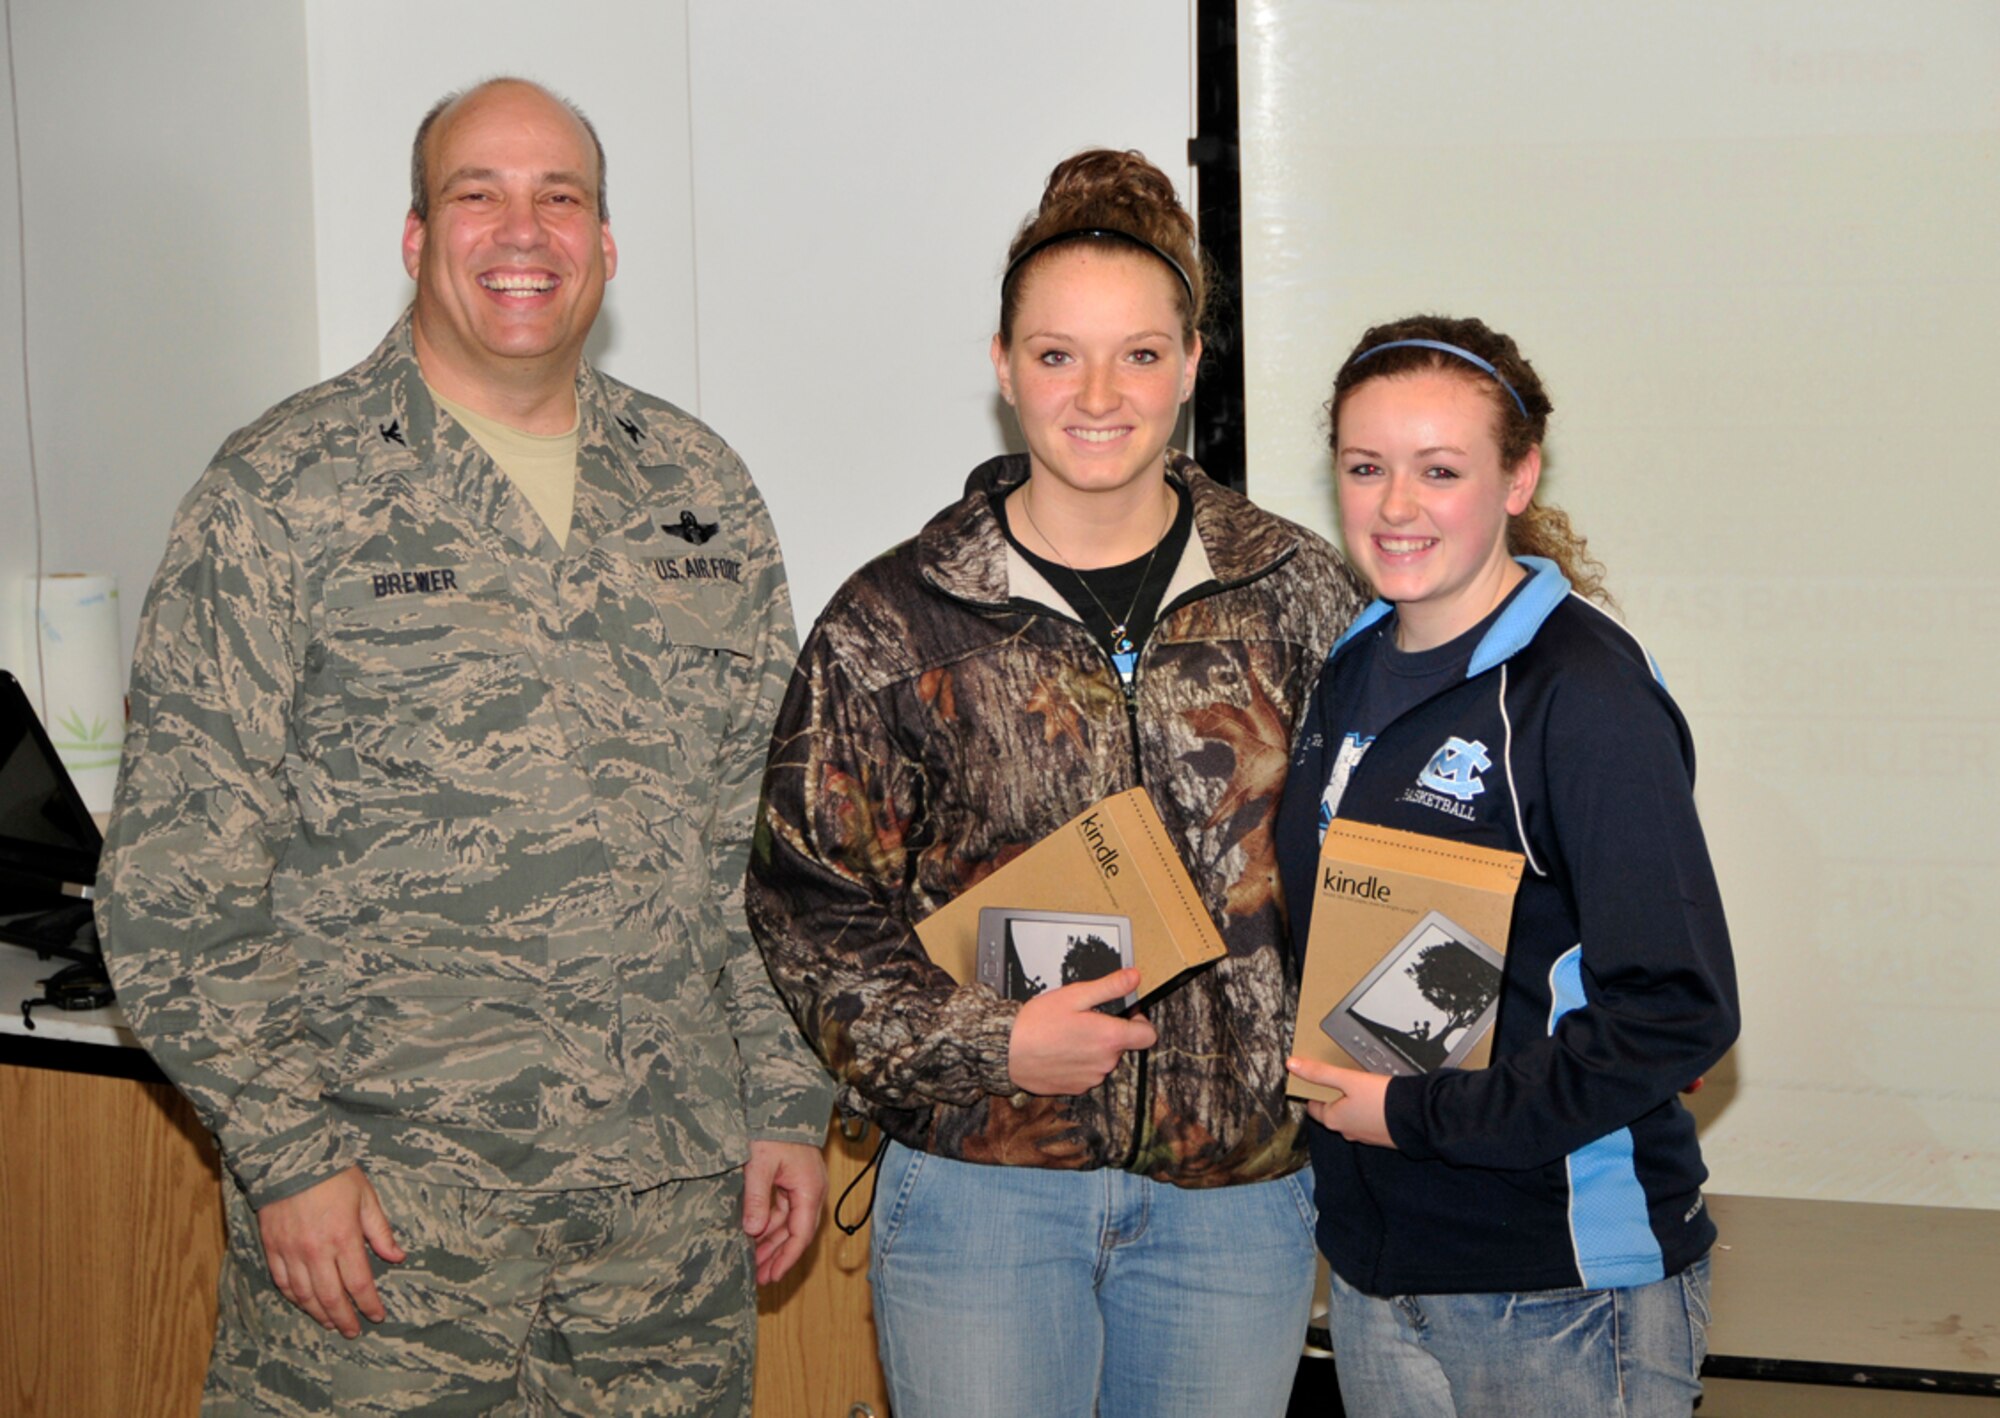 Moore County High School students Erica Limbaugh and Sarah Raby pose with AEDC Commander Col. Michael Brewer after receiving third place in this year’s Student Design Competition. (Photo by Jacqueline Cowan)